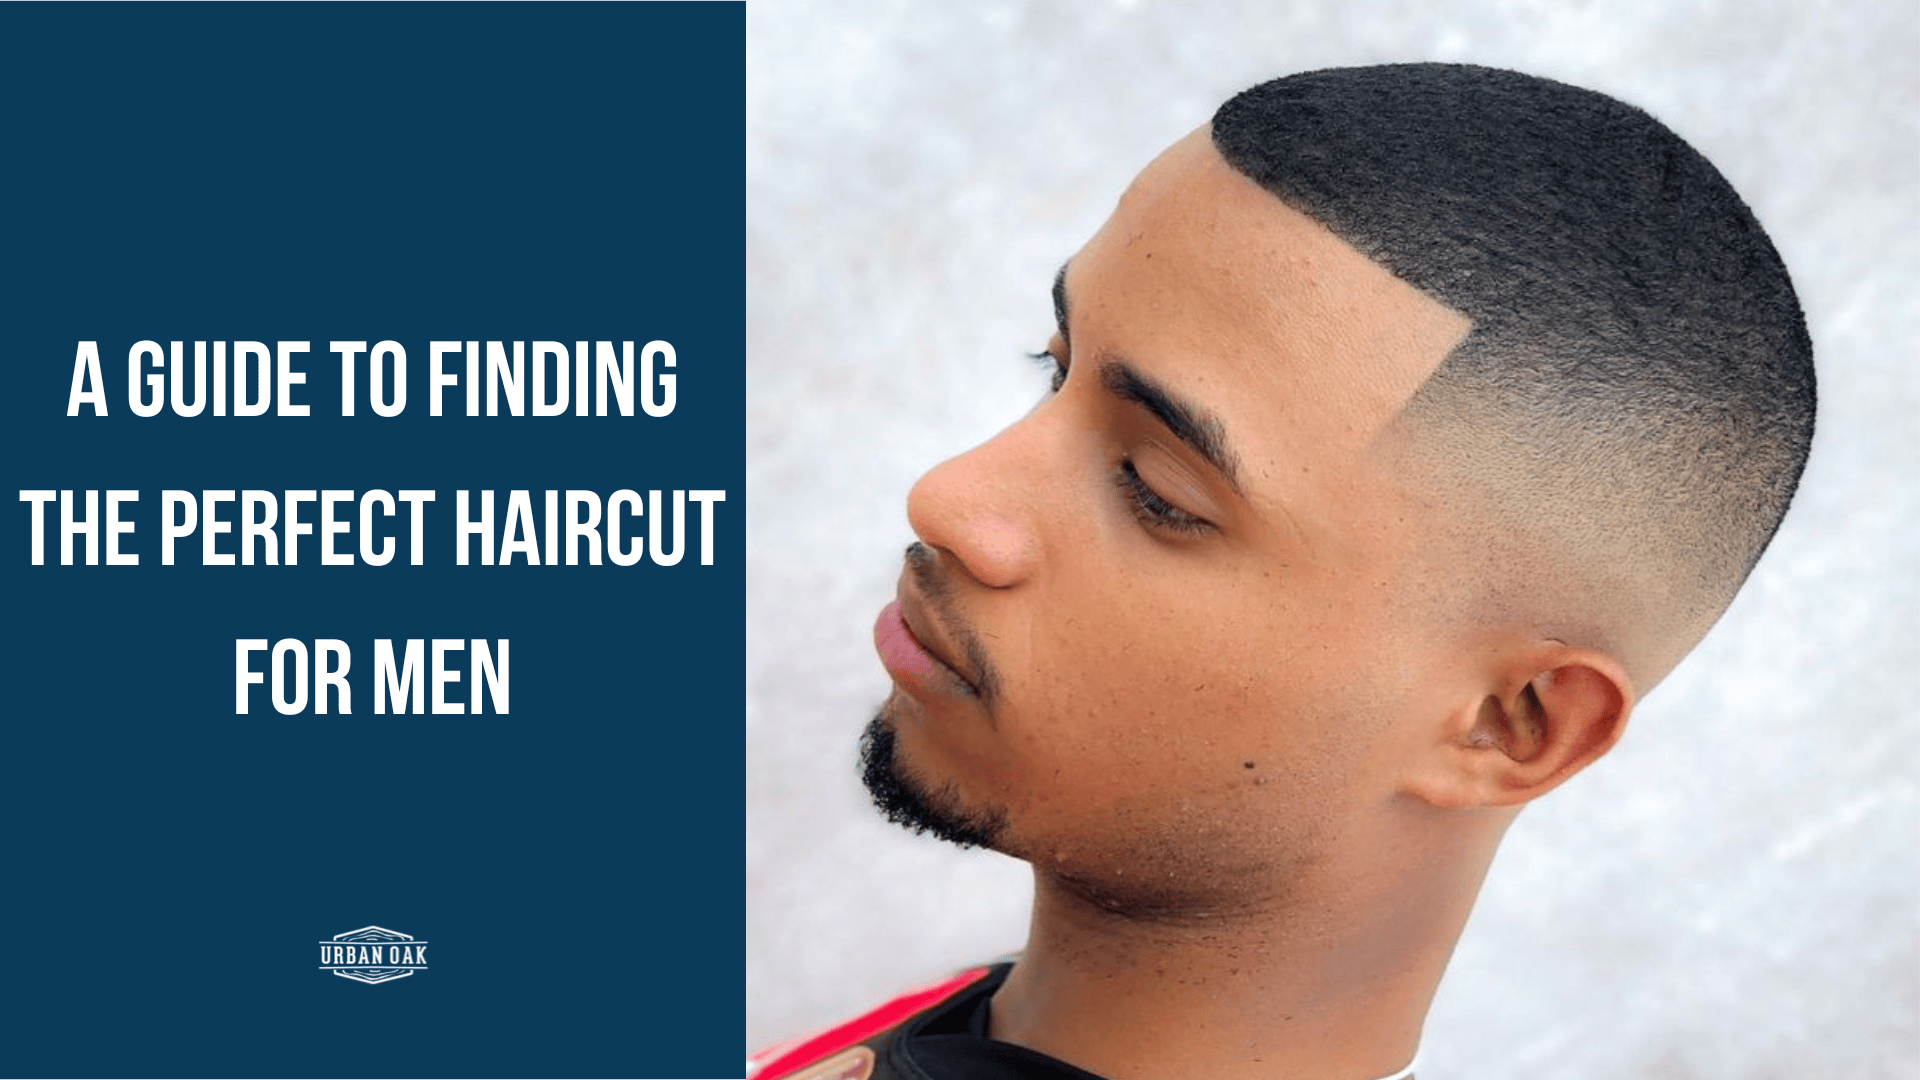 A Guide to Finding the Perfect Haircut for Men